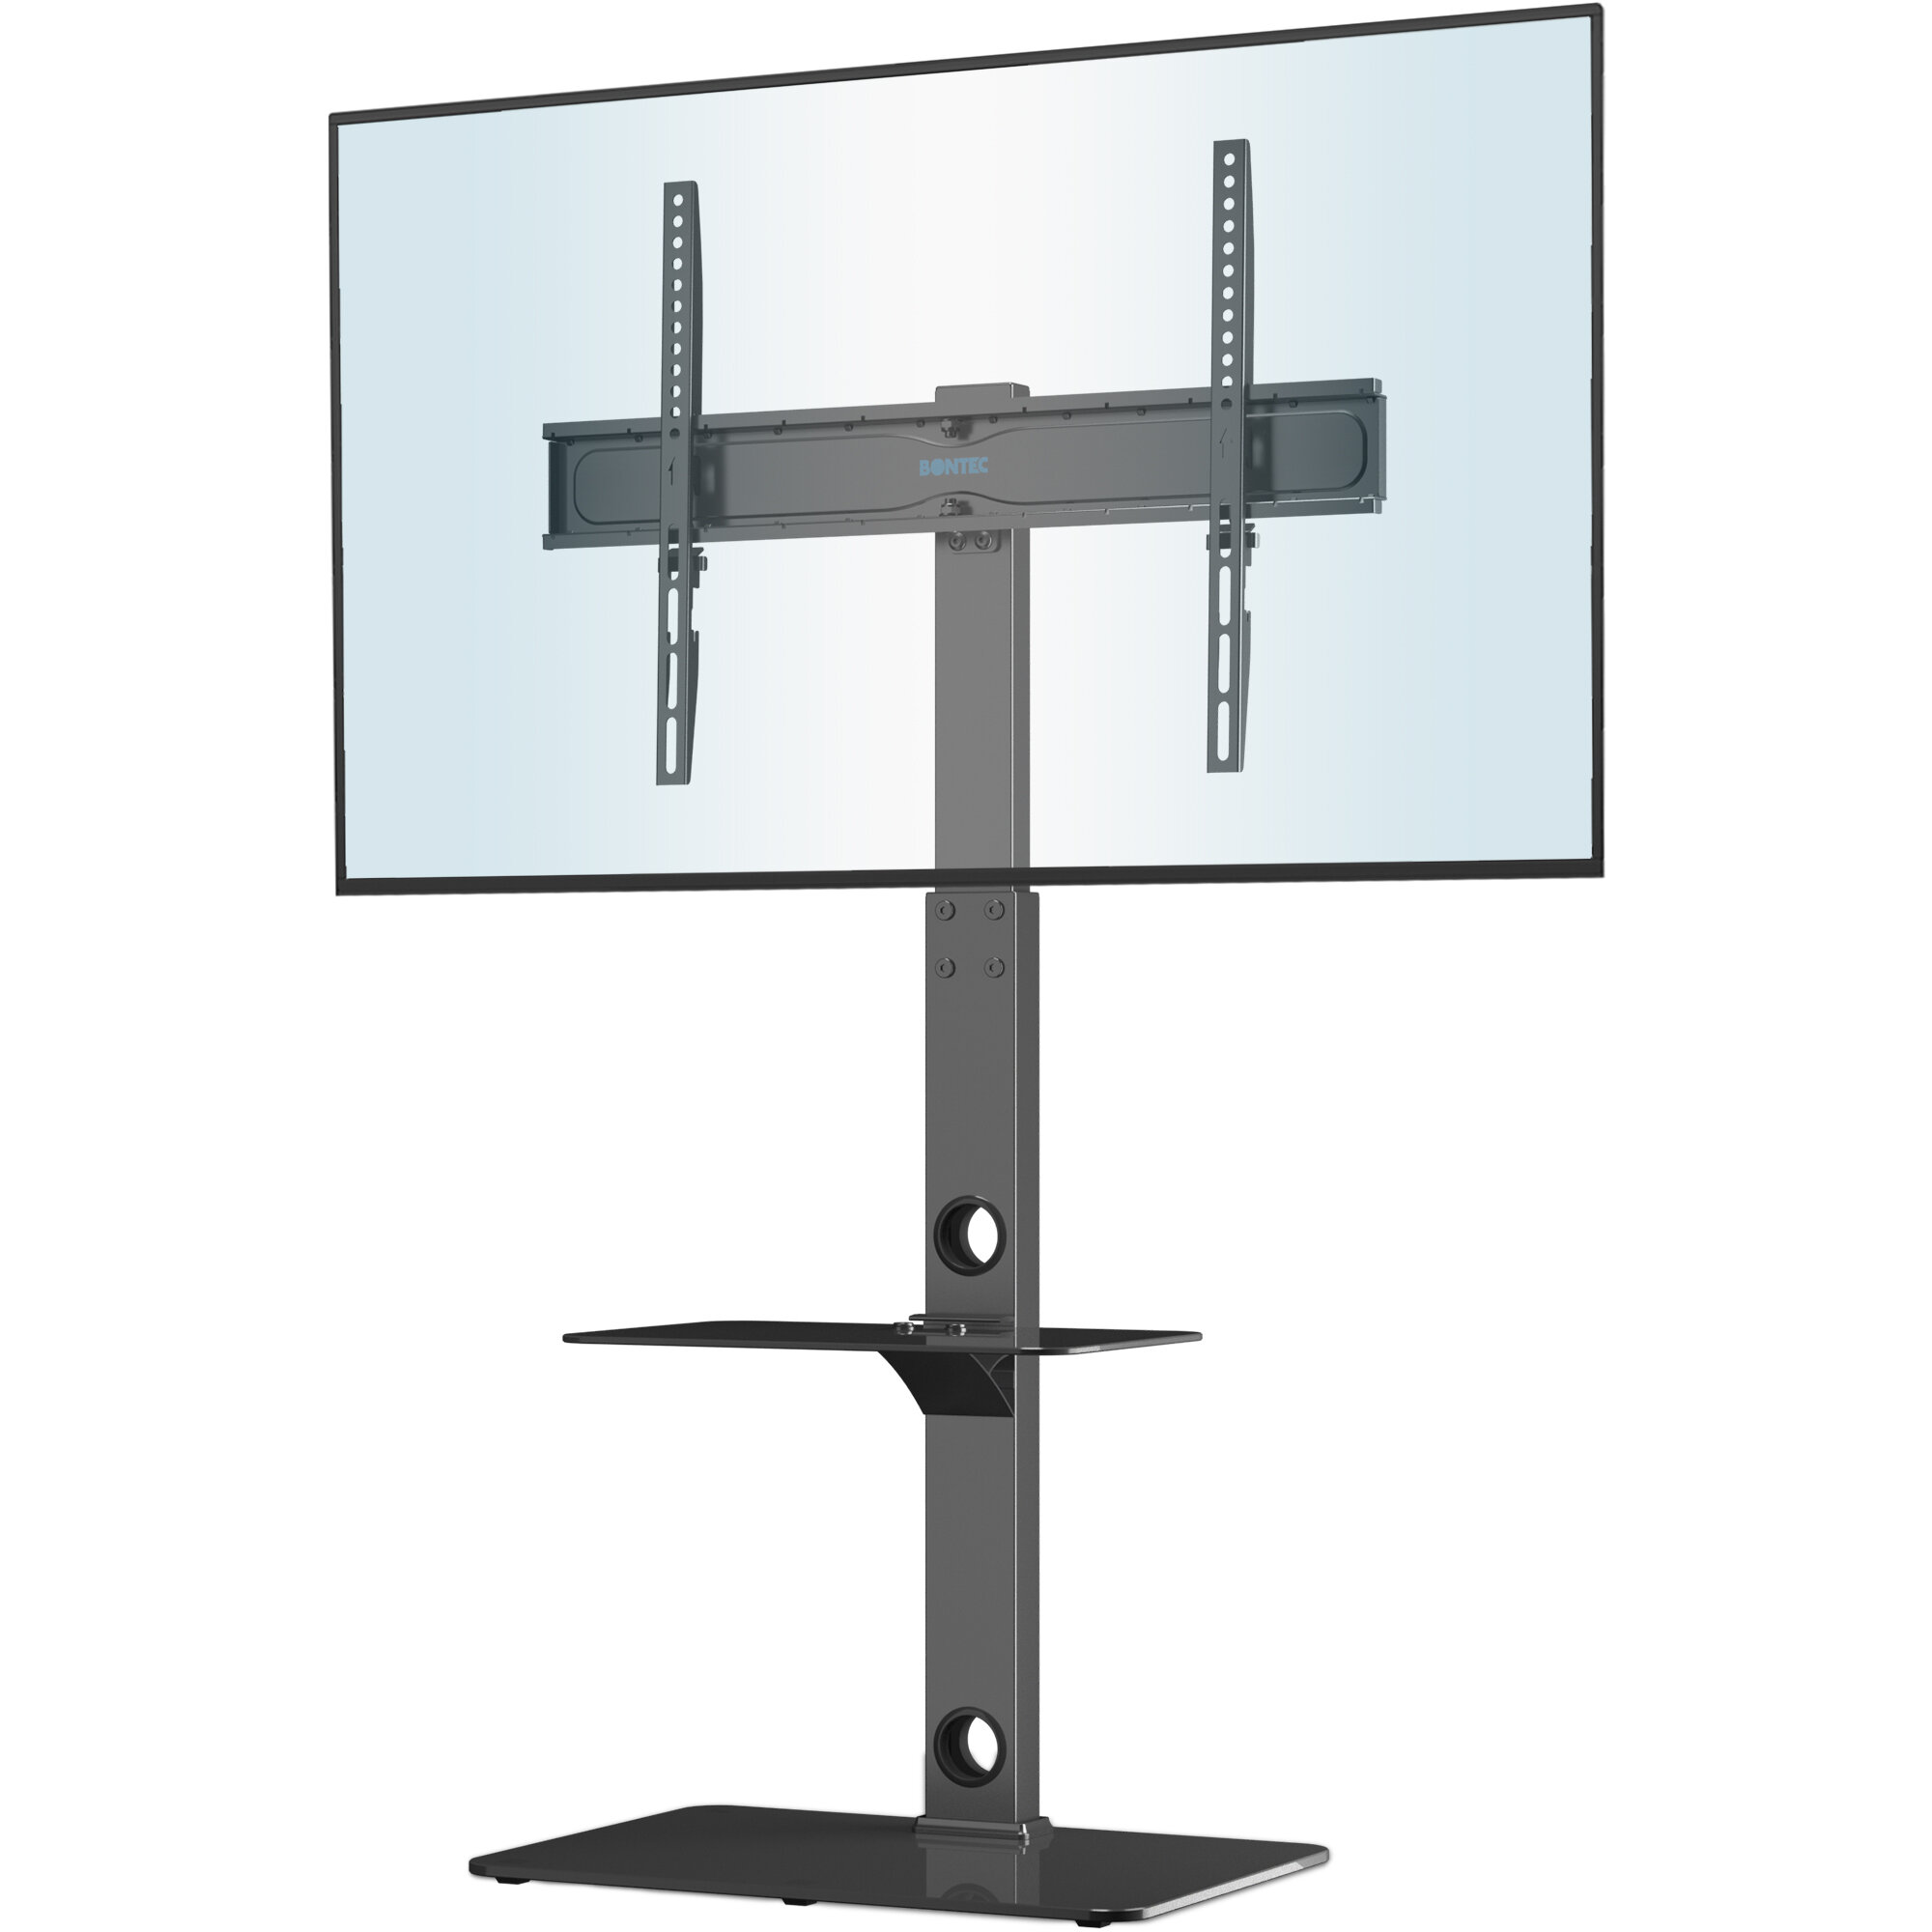 1home TV Stand with Bracket Mount Swiel for 32 inch to 70 inch 